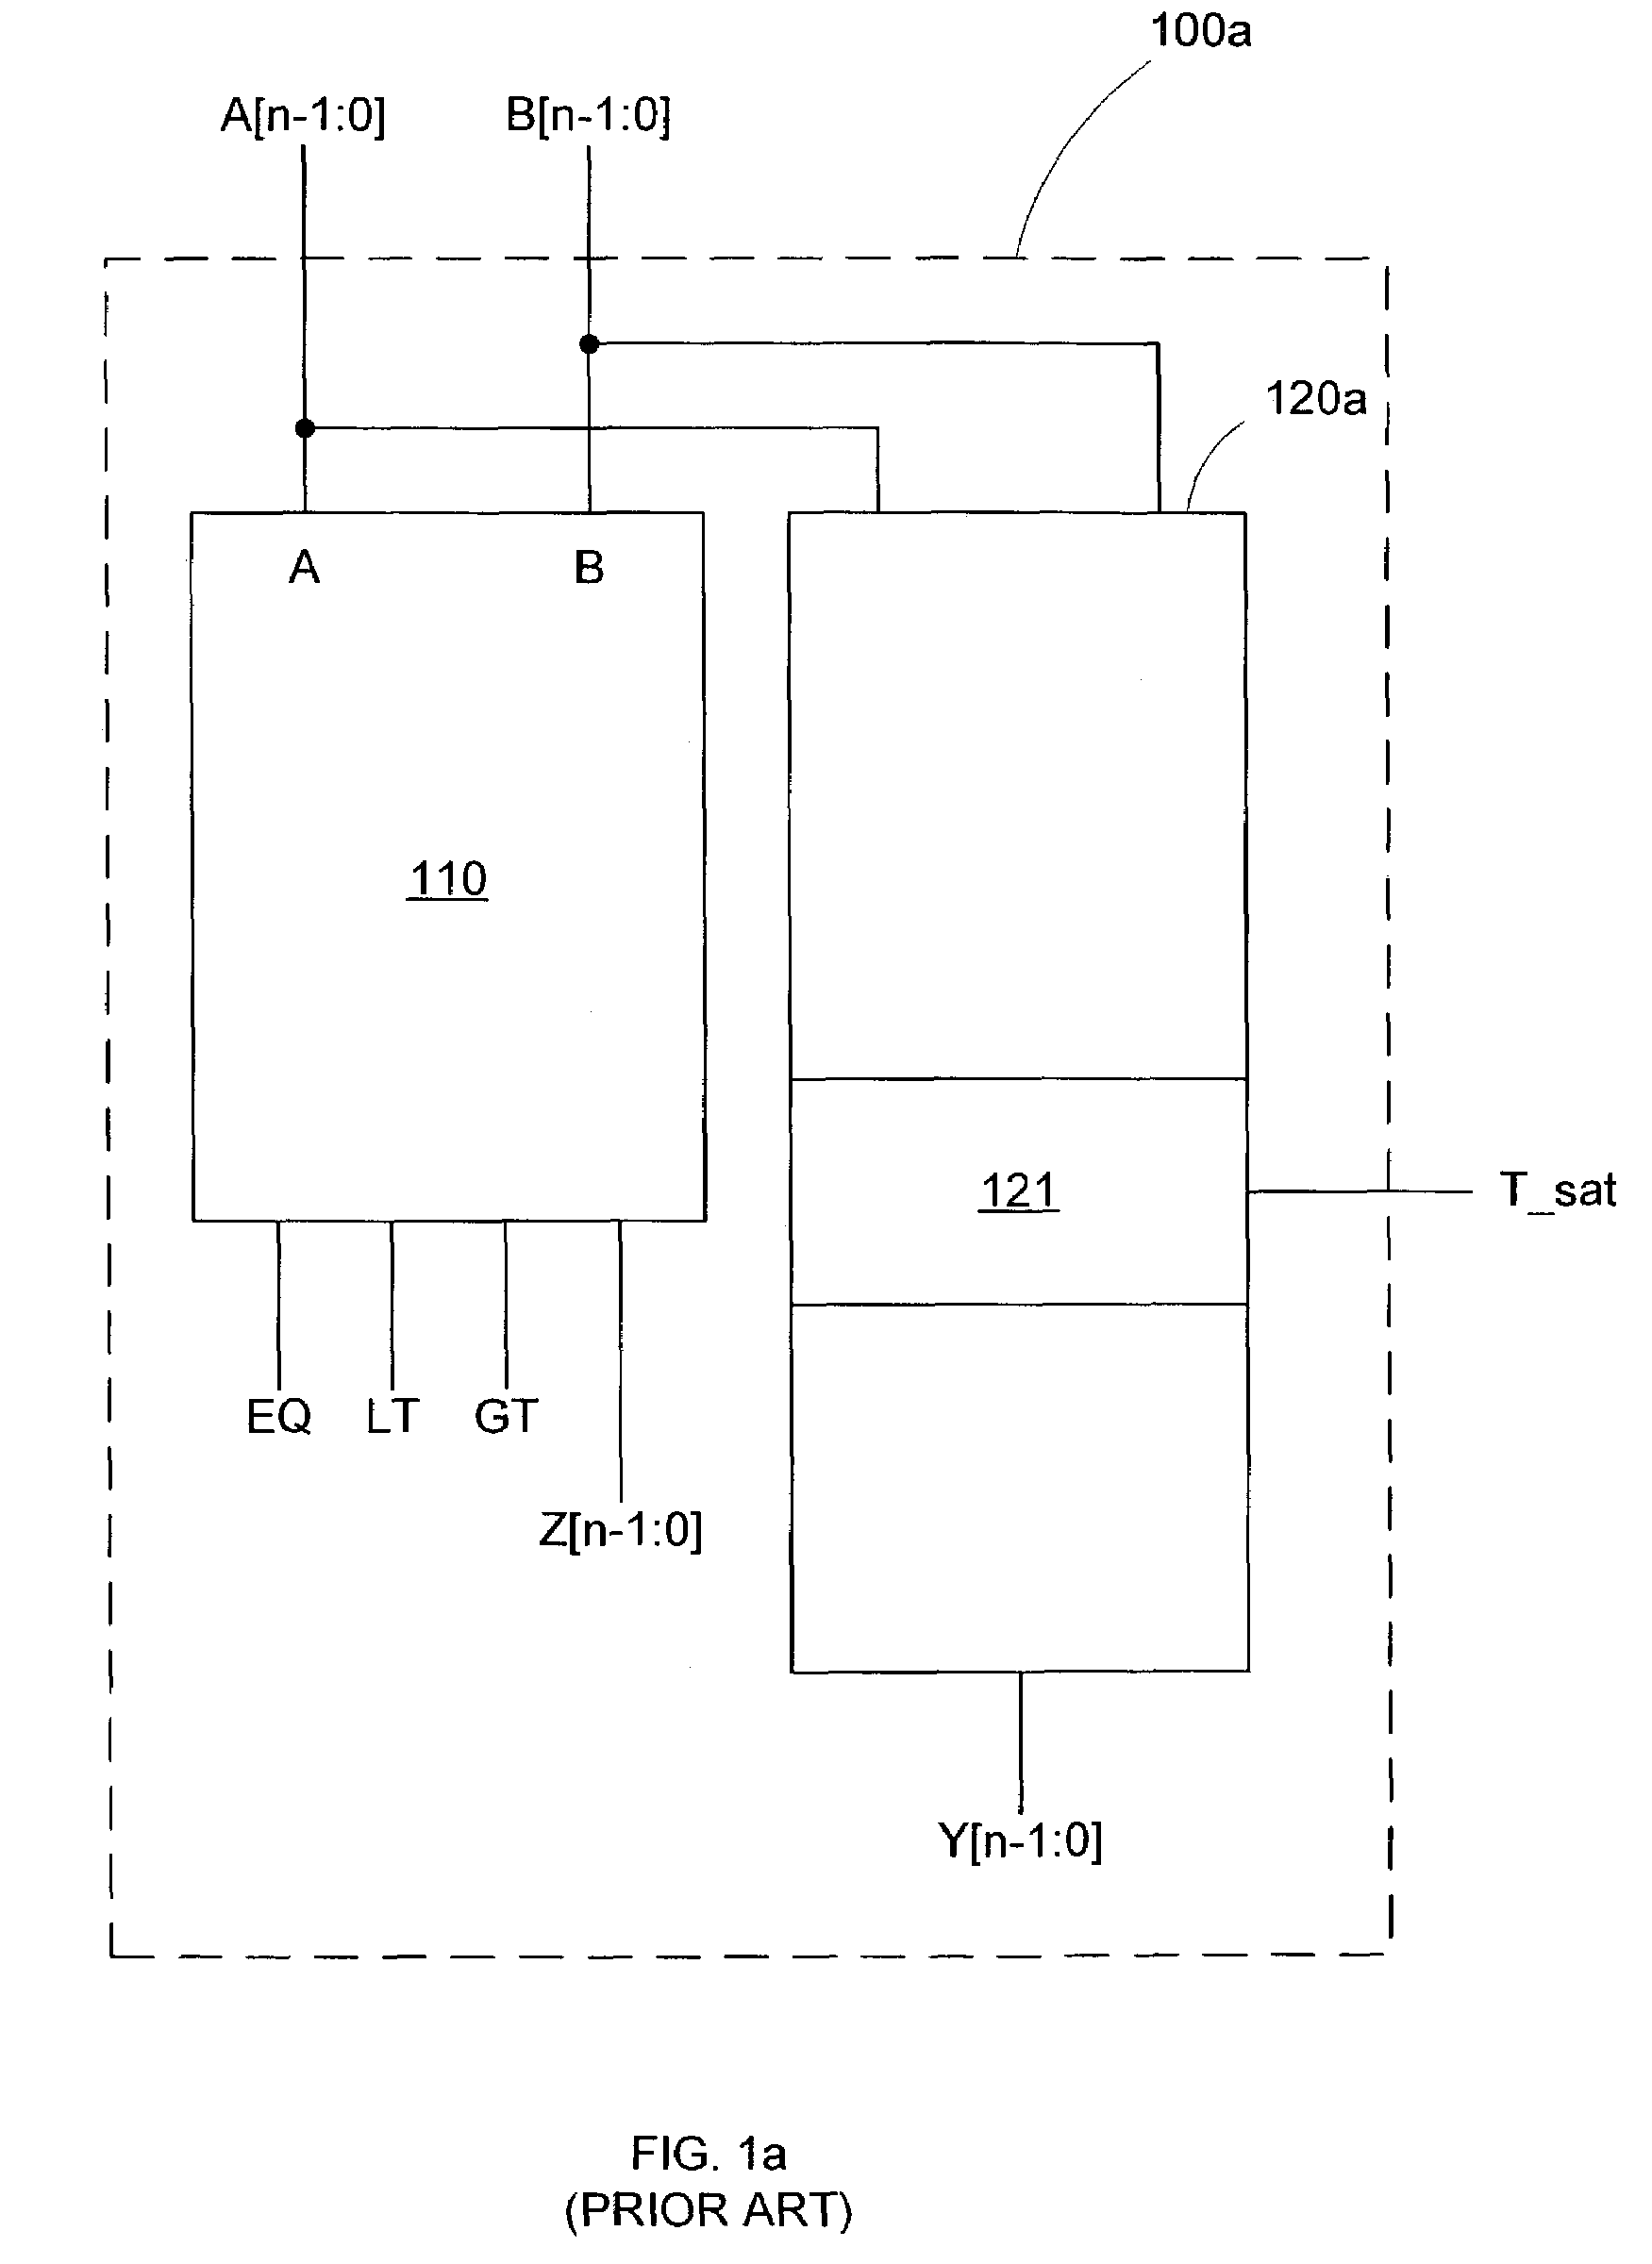 Arithmetic logic unit with merged circuitry for comparison, minimum/maximum selection and saturation for signed and unsigned numbers